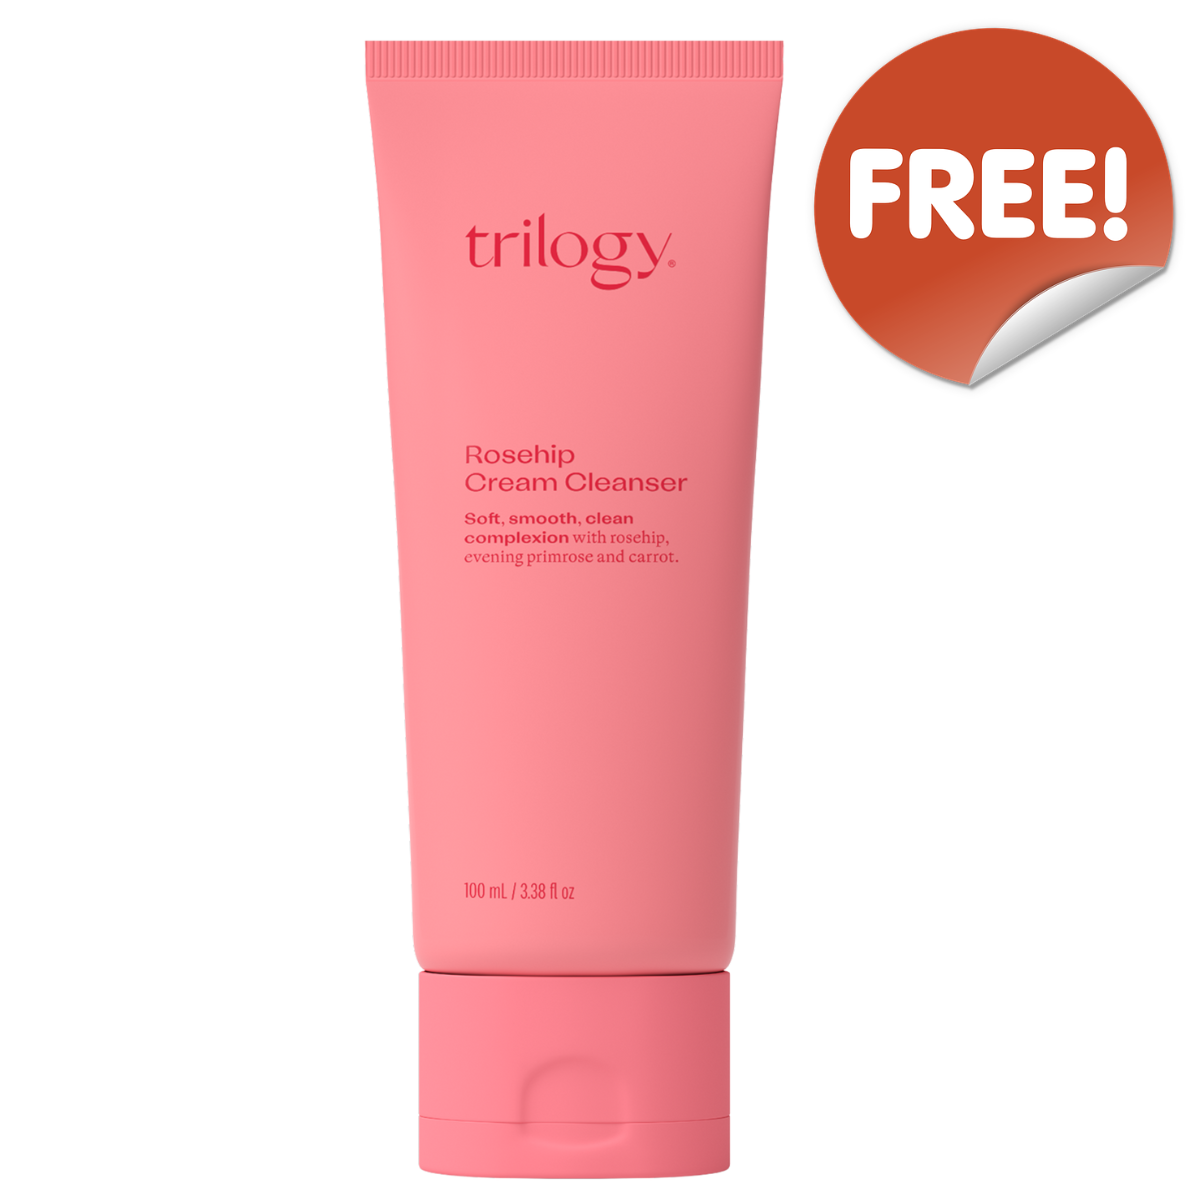 FREE Gift TRILOGY Rosehip Cream Cleanser 100ml (GWP OFFER)